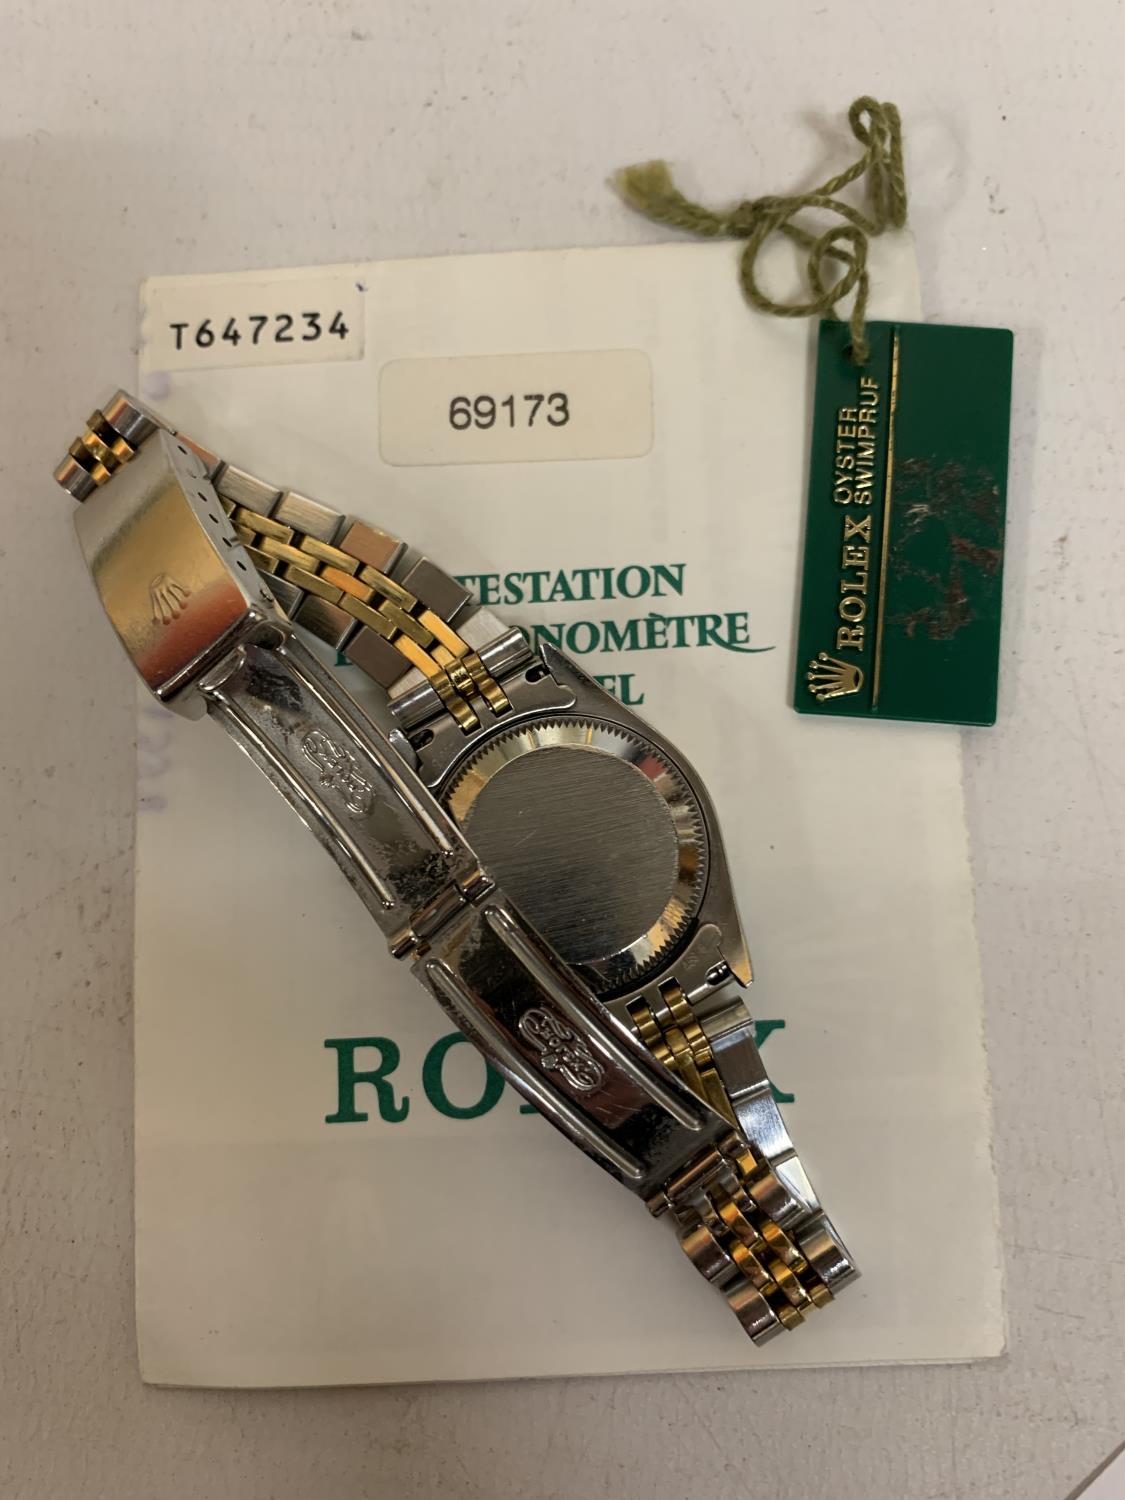 A LADIES' BI-METAL ROLEX DATEJUST WRISTWATCH WITH TAGS AND CARD - Image 3 of 3